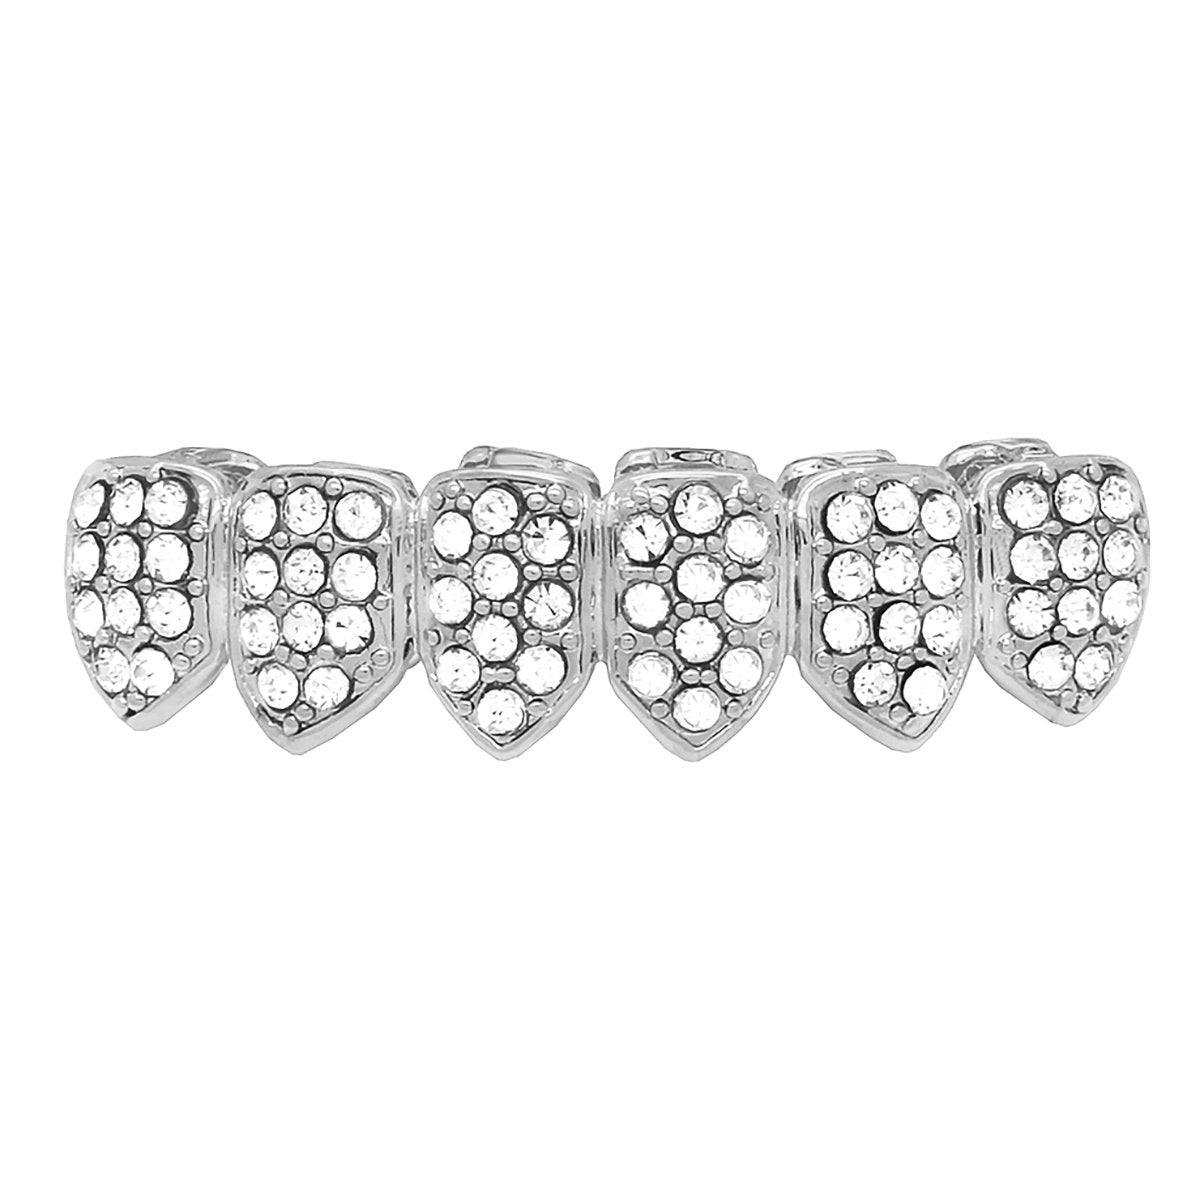 GRILLZ SET SILVER FULLY STONE